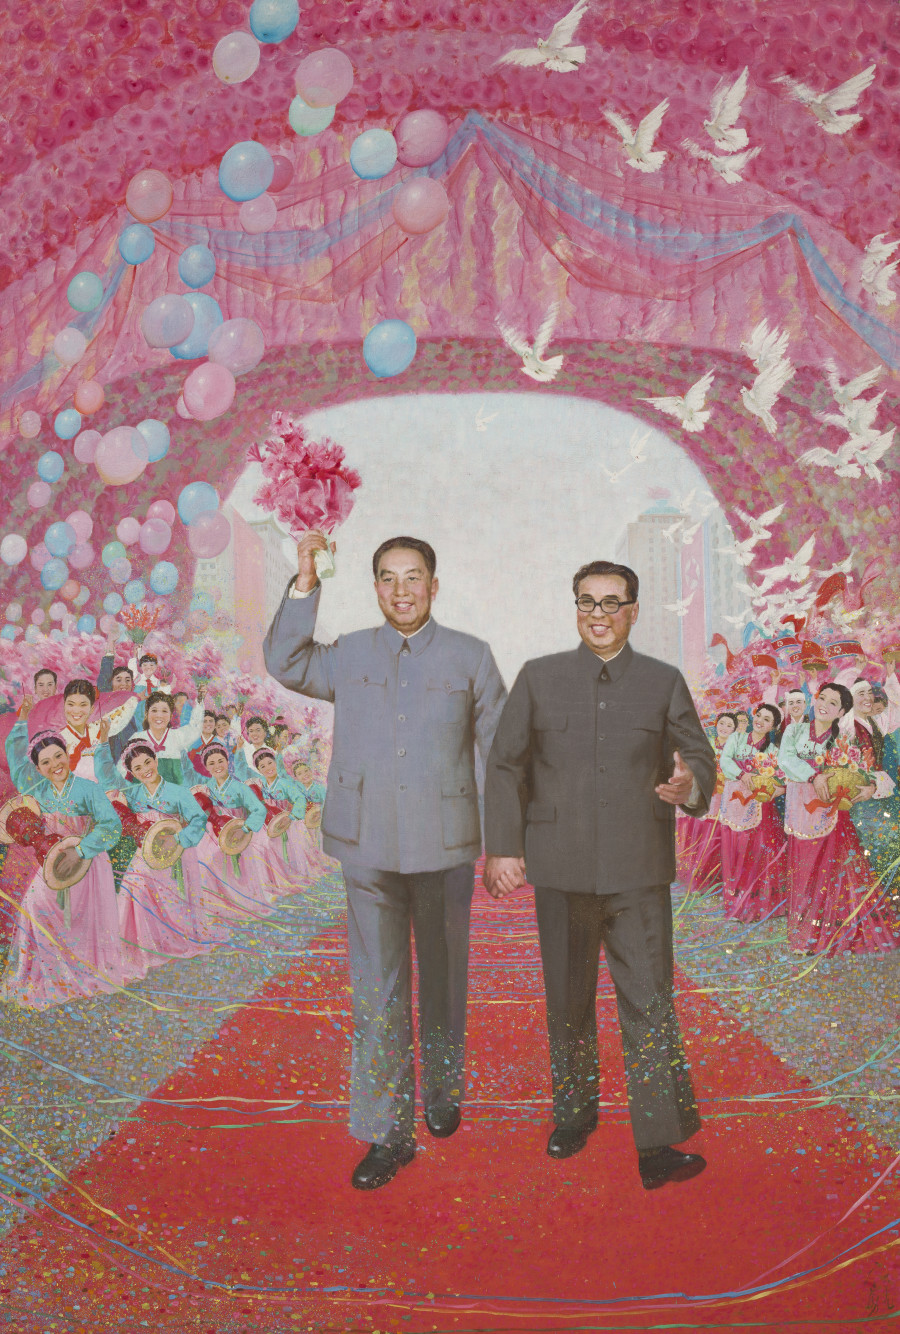 Guang Tingbo, Hua Guofeng in North Korea, 1978. Oil on canvas, 250 x 174 cm. Photo: Sigg Collection, Mauensee © The artist